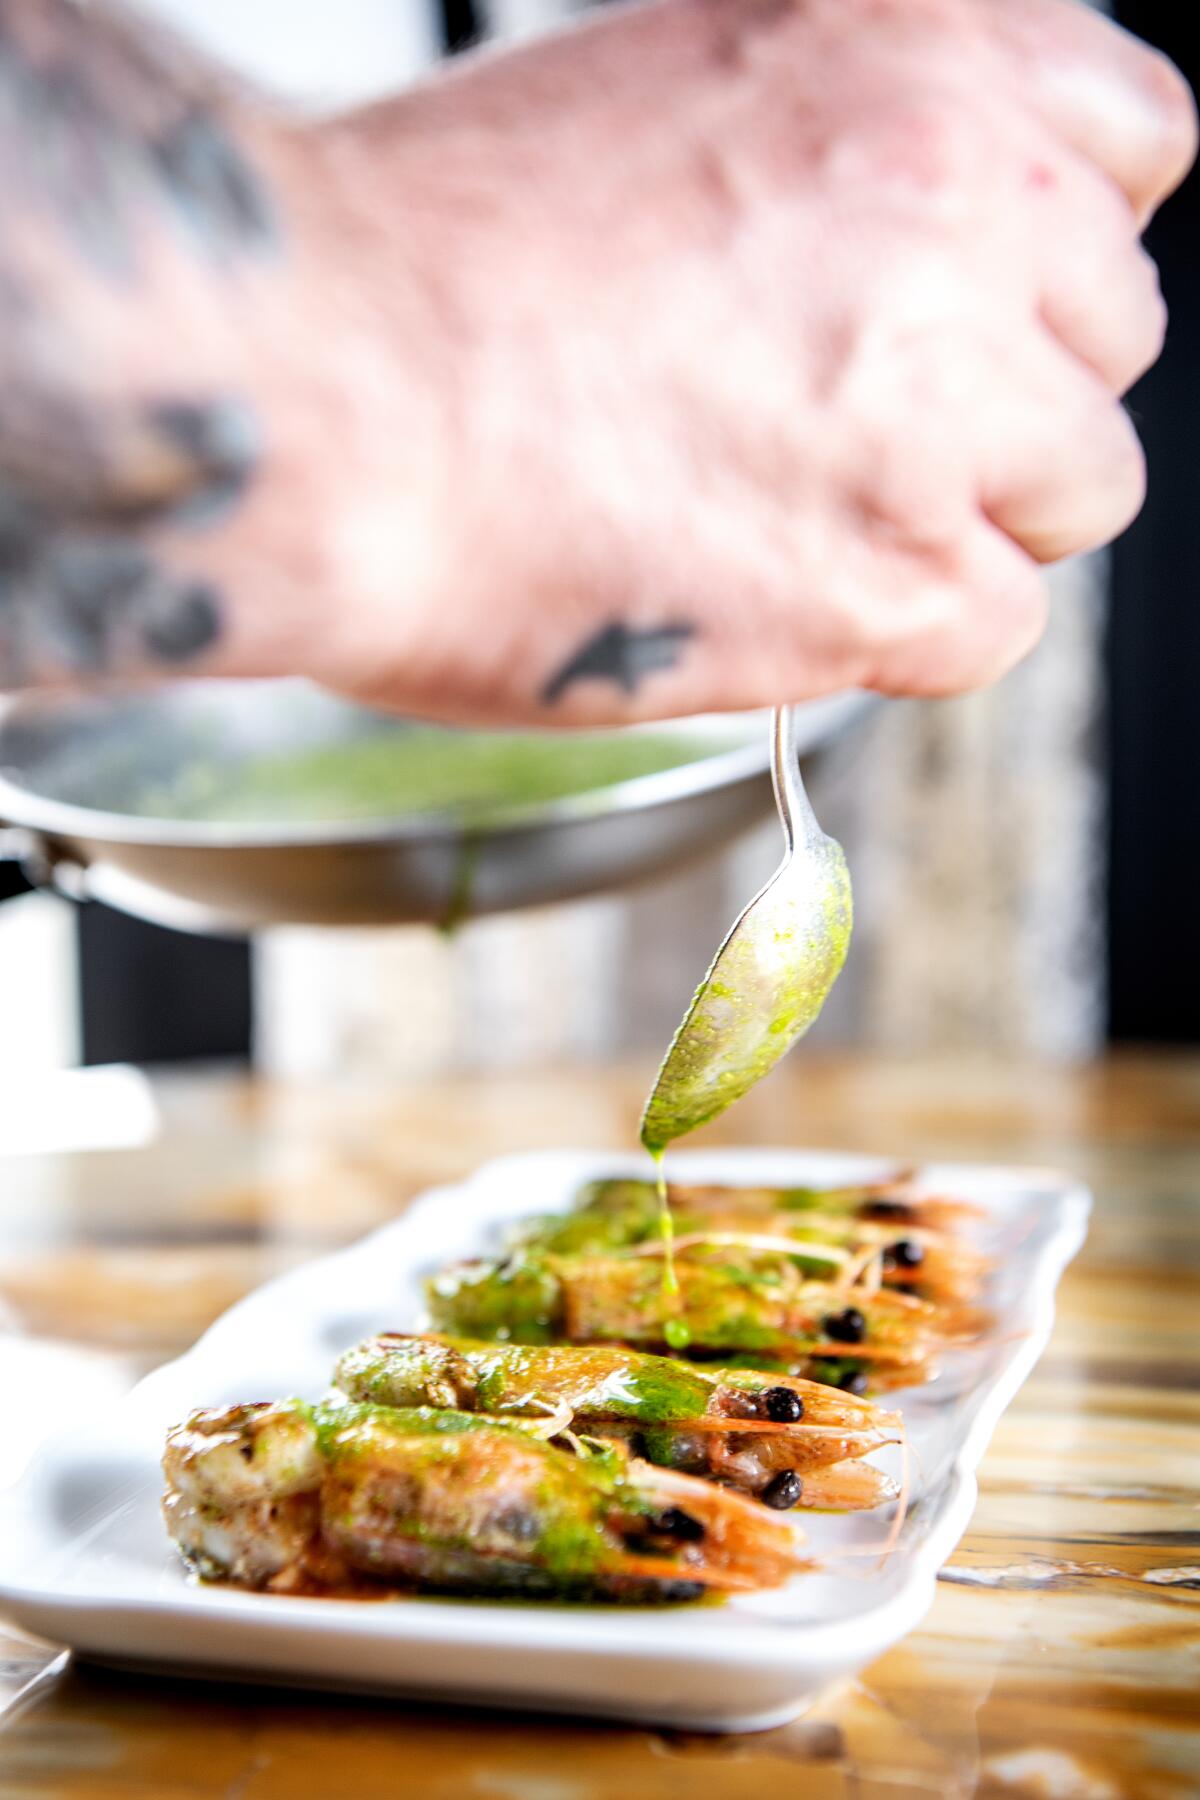 A hand holding a spoon drizzles salsa verde onto prawns.